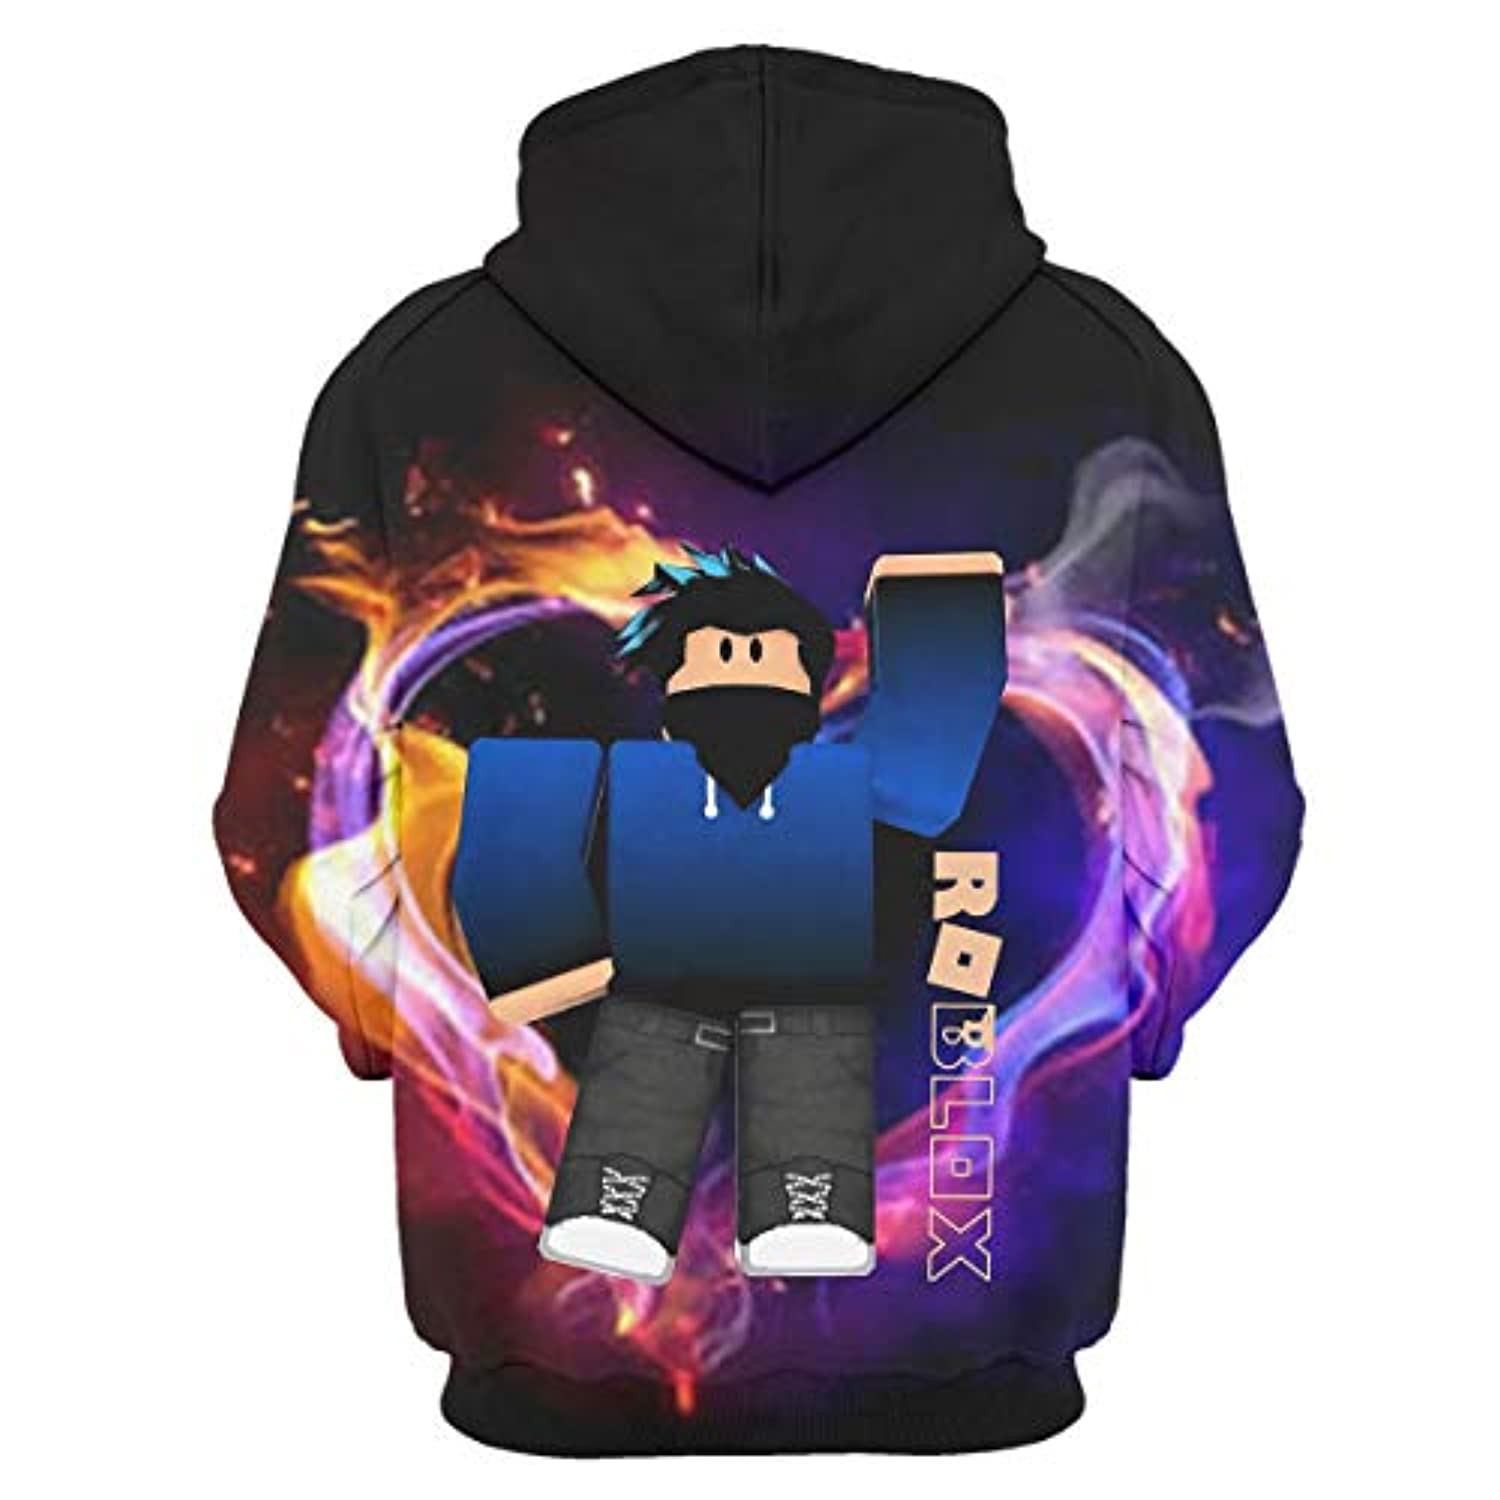 230 Roblox skins ideas  roblox, roblox pictures, hoodie roblox